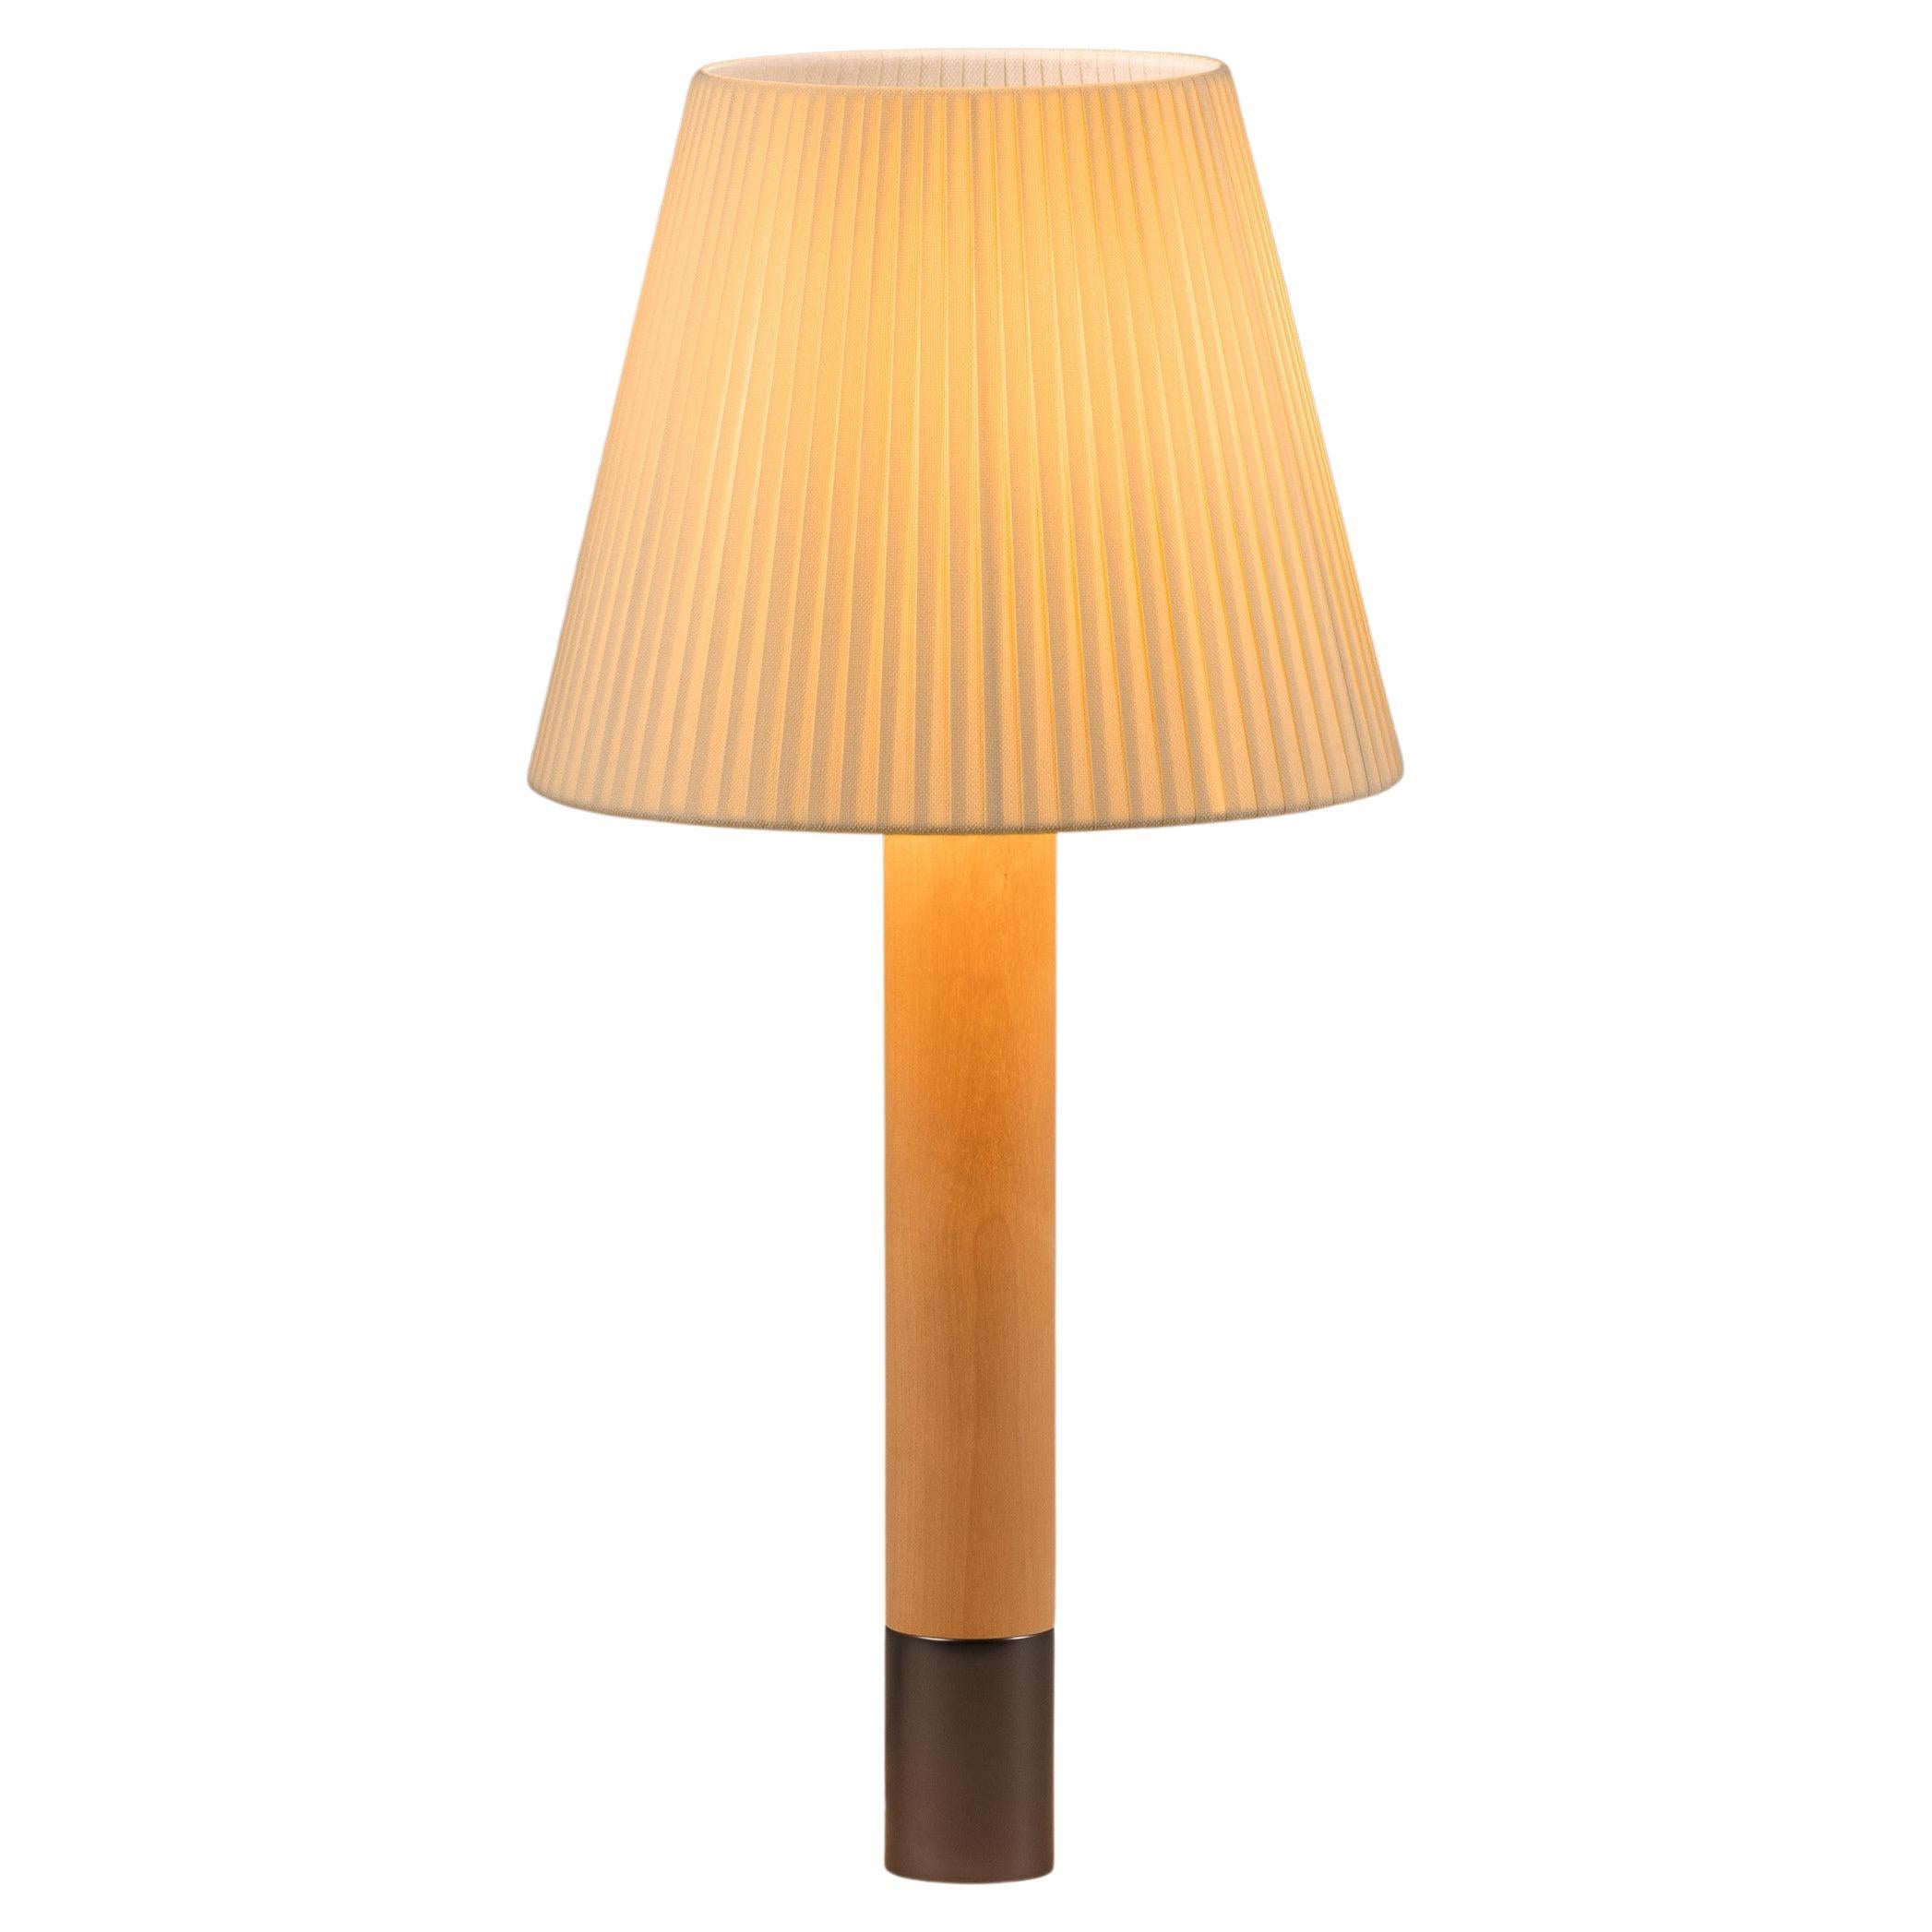 Bronze and Natural Básica M1 Table Lamp by Santiago Roqueta, Santa & Cole For Sale